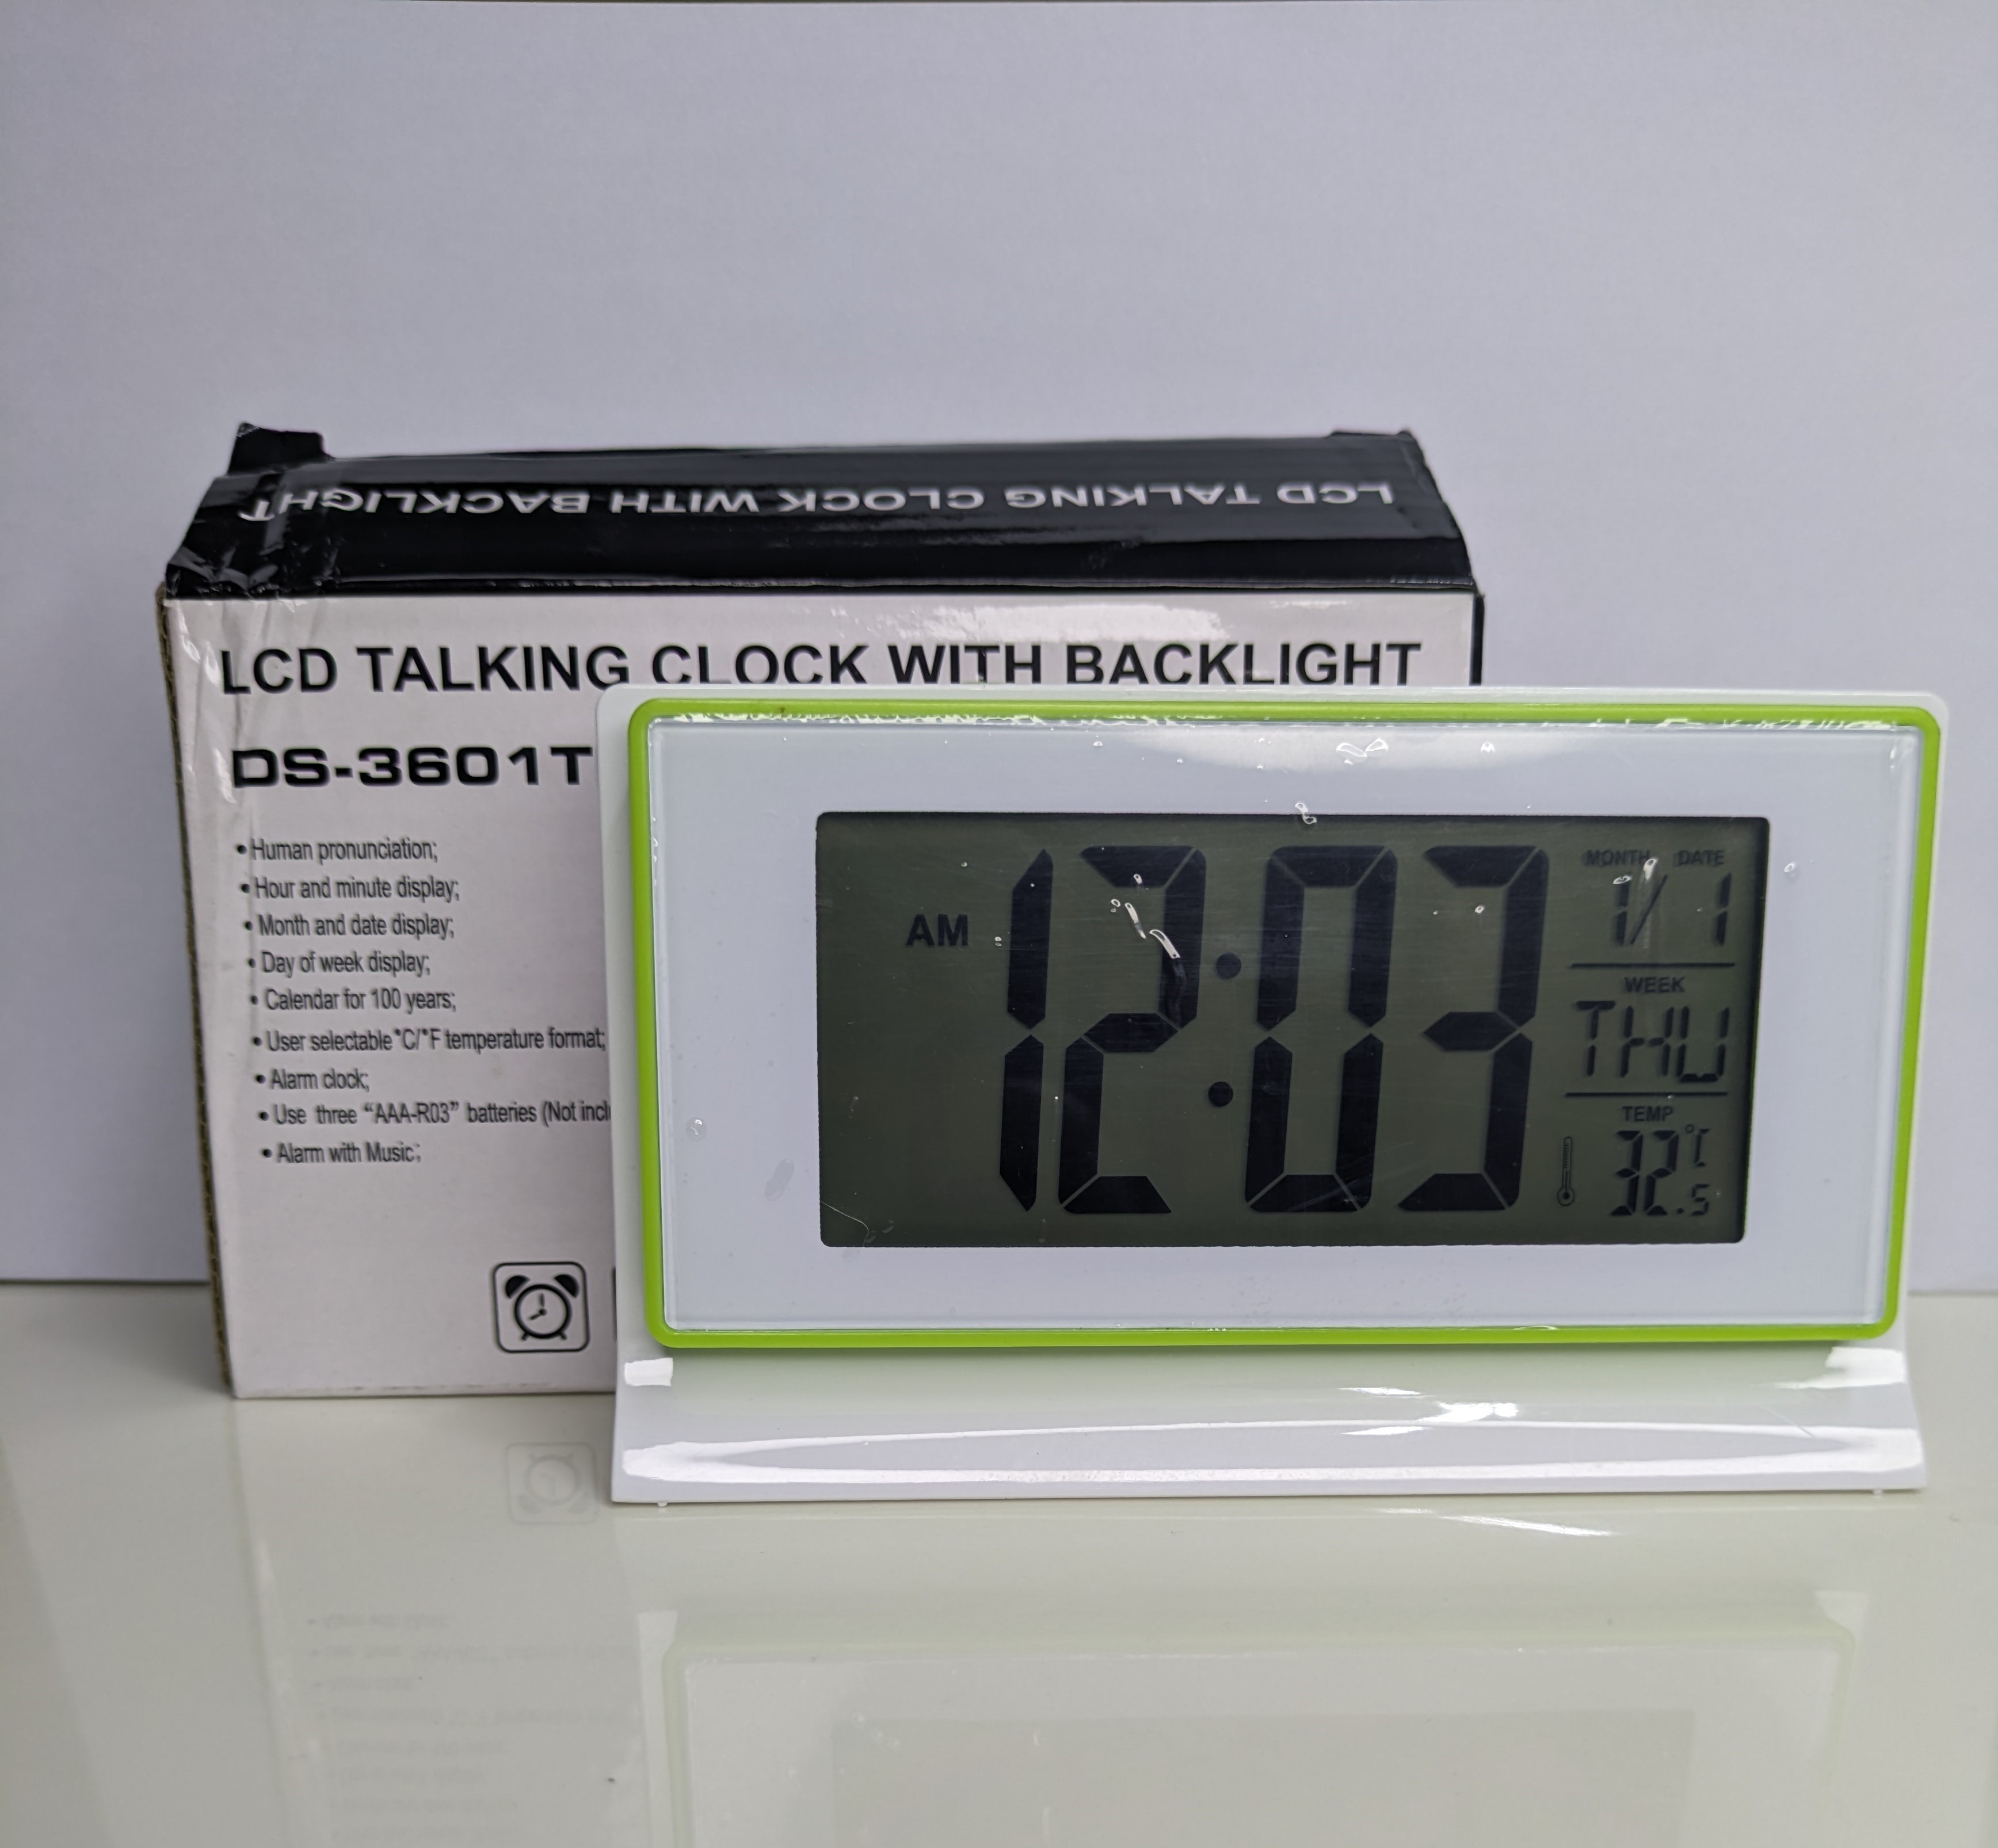 LCD talking table clock with backlight